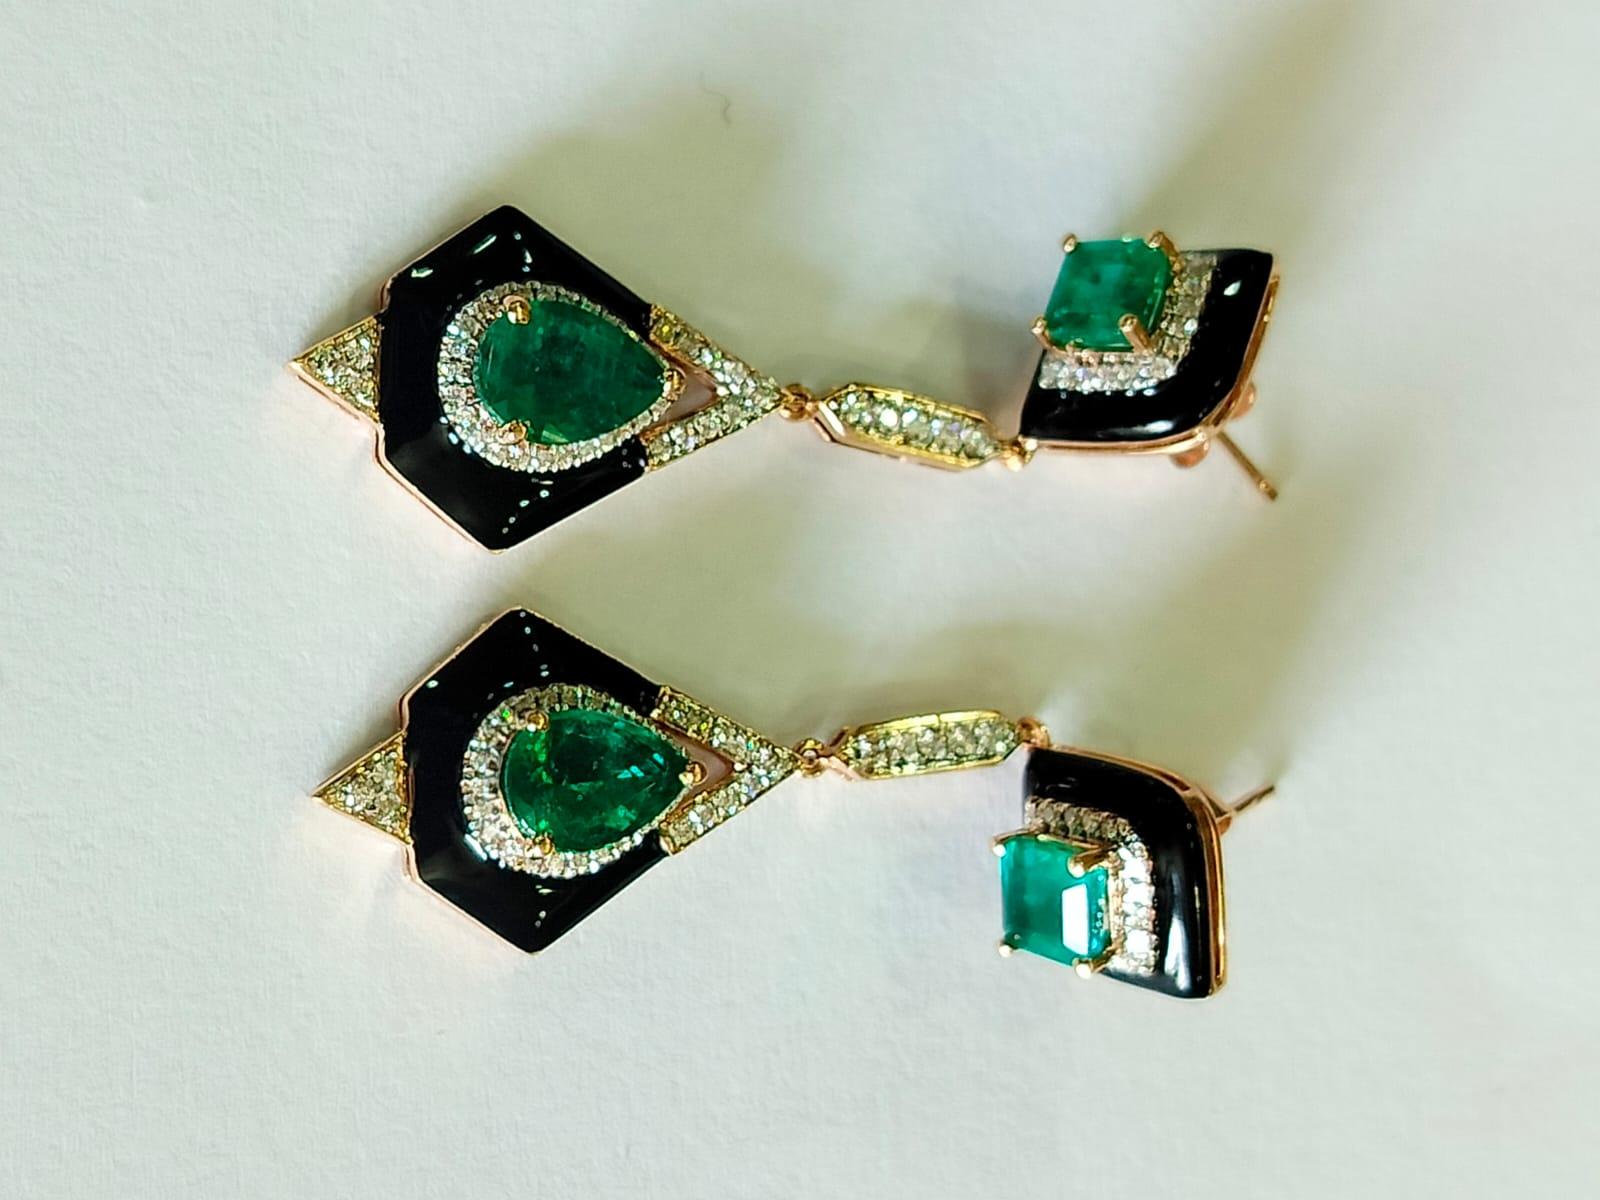 A very gorgeous and beautiful, Art Deco style Emerald Dangle Earrings set in 18K Gold. The weight of the Emeralds is 3.54 carats. The Emeralds are completely natural, without any treatment and is of Zambian origin. The Diamonds weight is 0.47